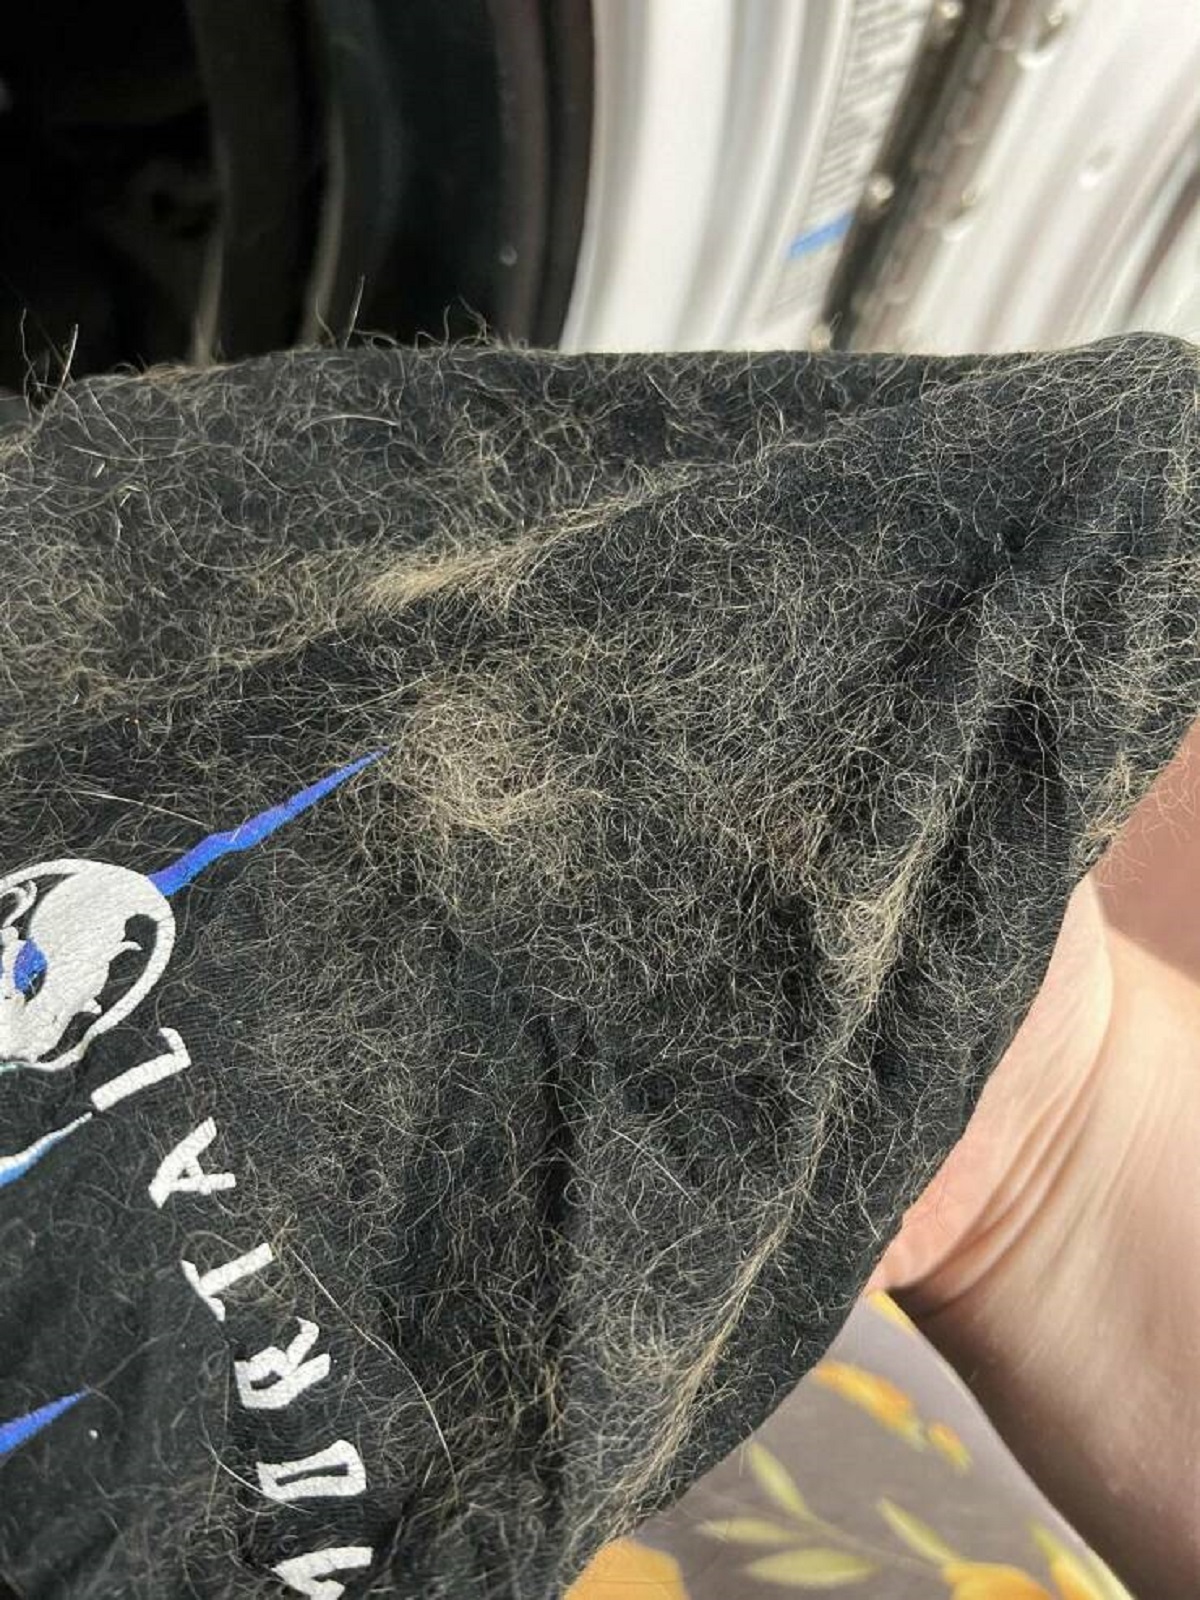 "We have washers in our building that we have to pay per wash. Someone left a ball of hair in it beforehand I think, had to rewash everything, expensively."